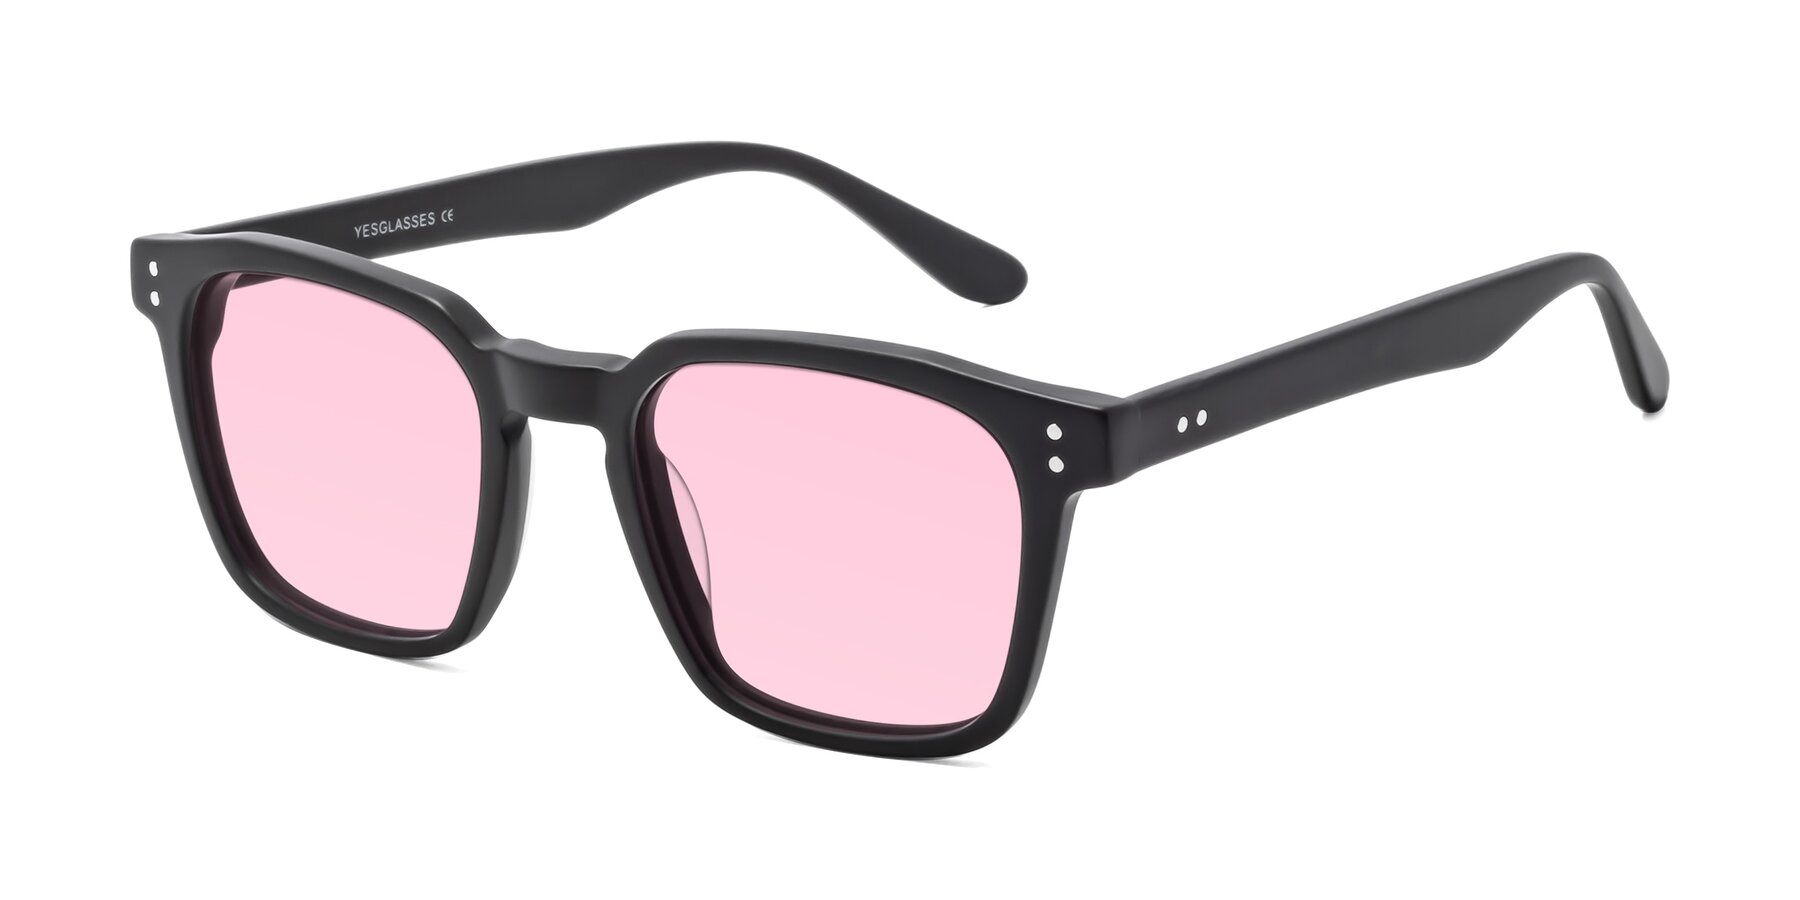 Angle of Riverside in Matte Black with Light Pink Tinted Lenses